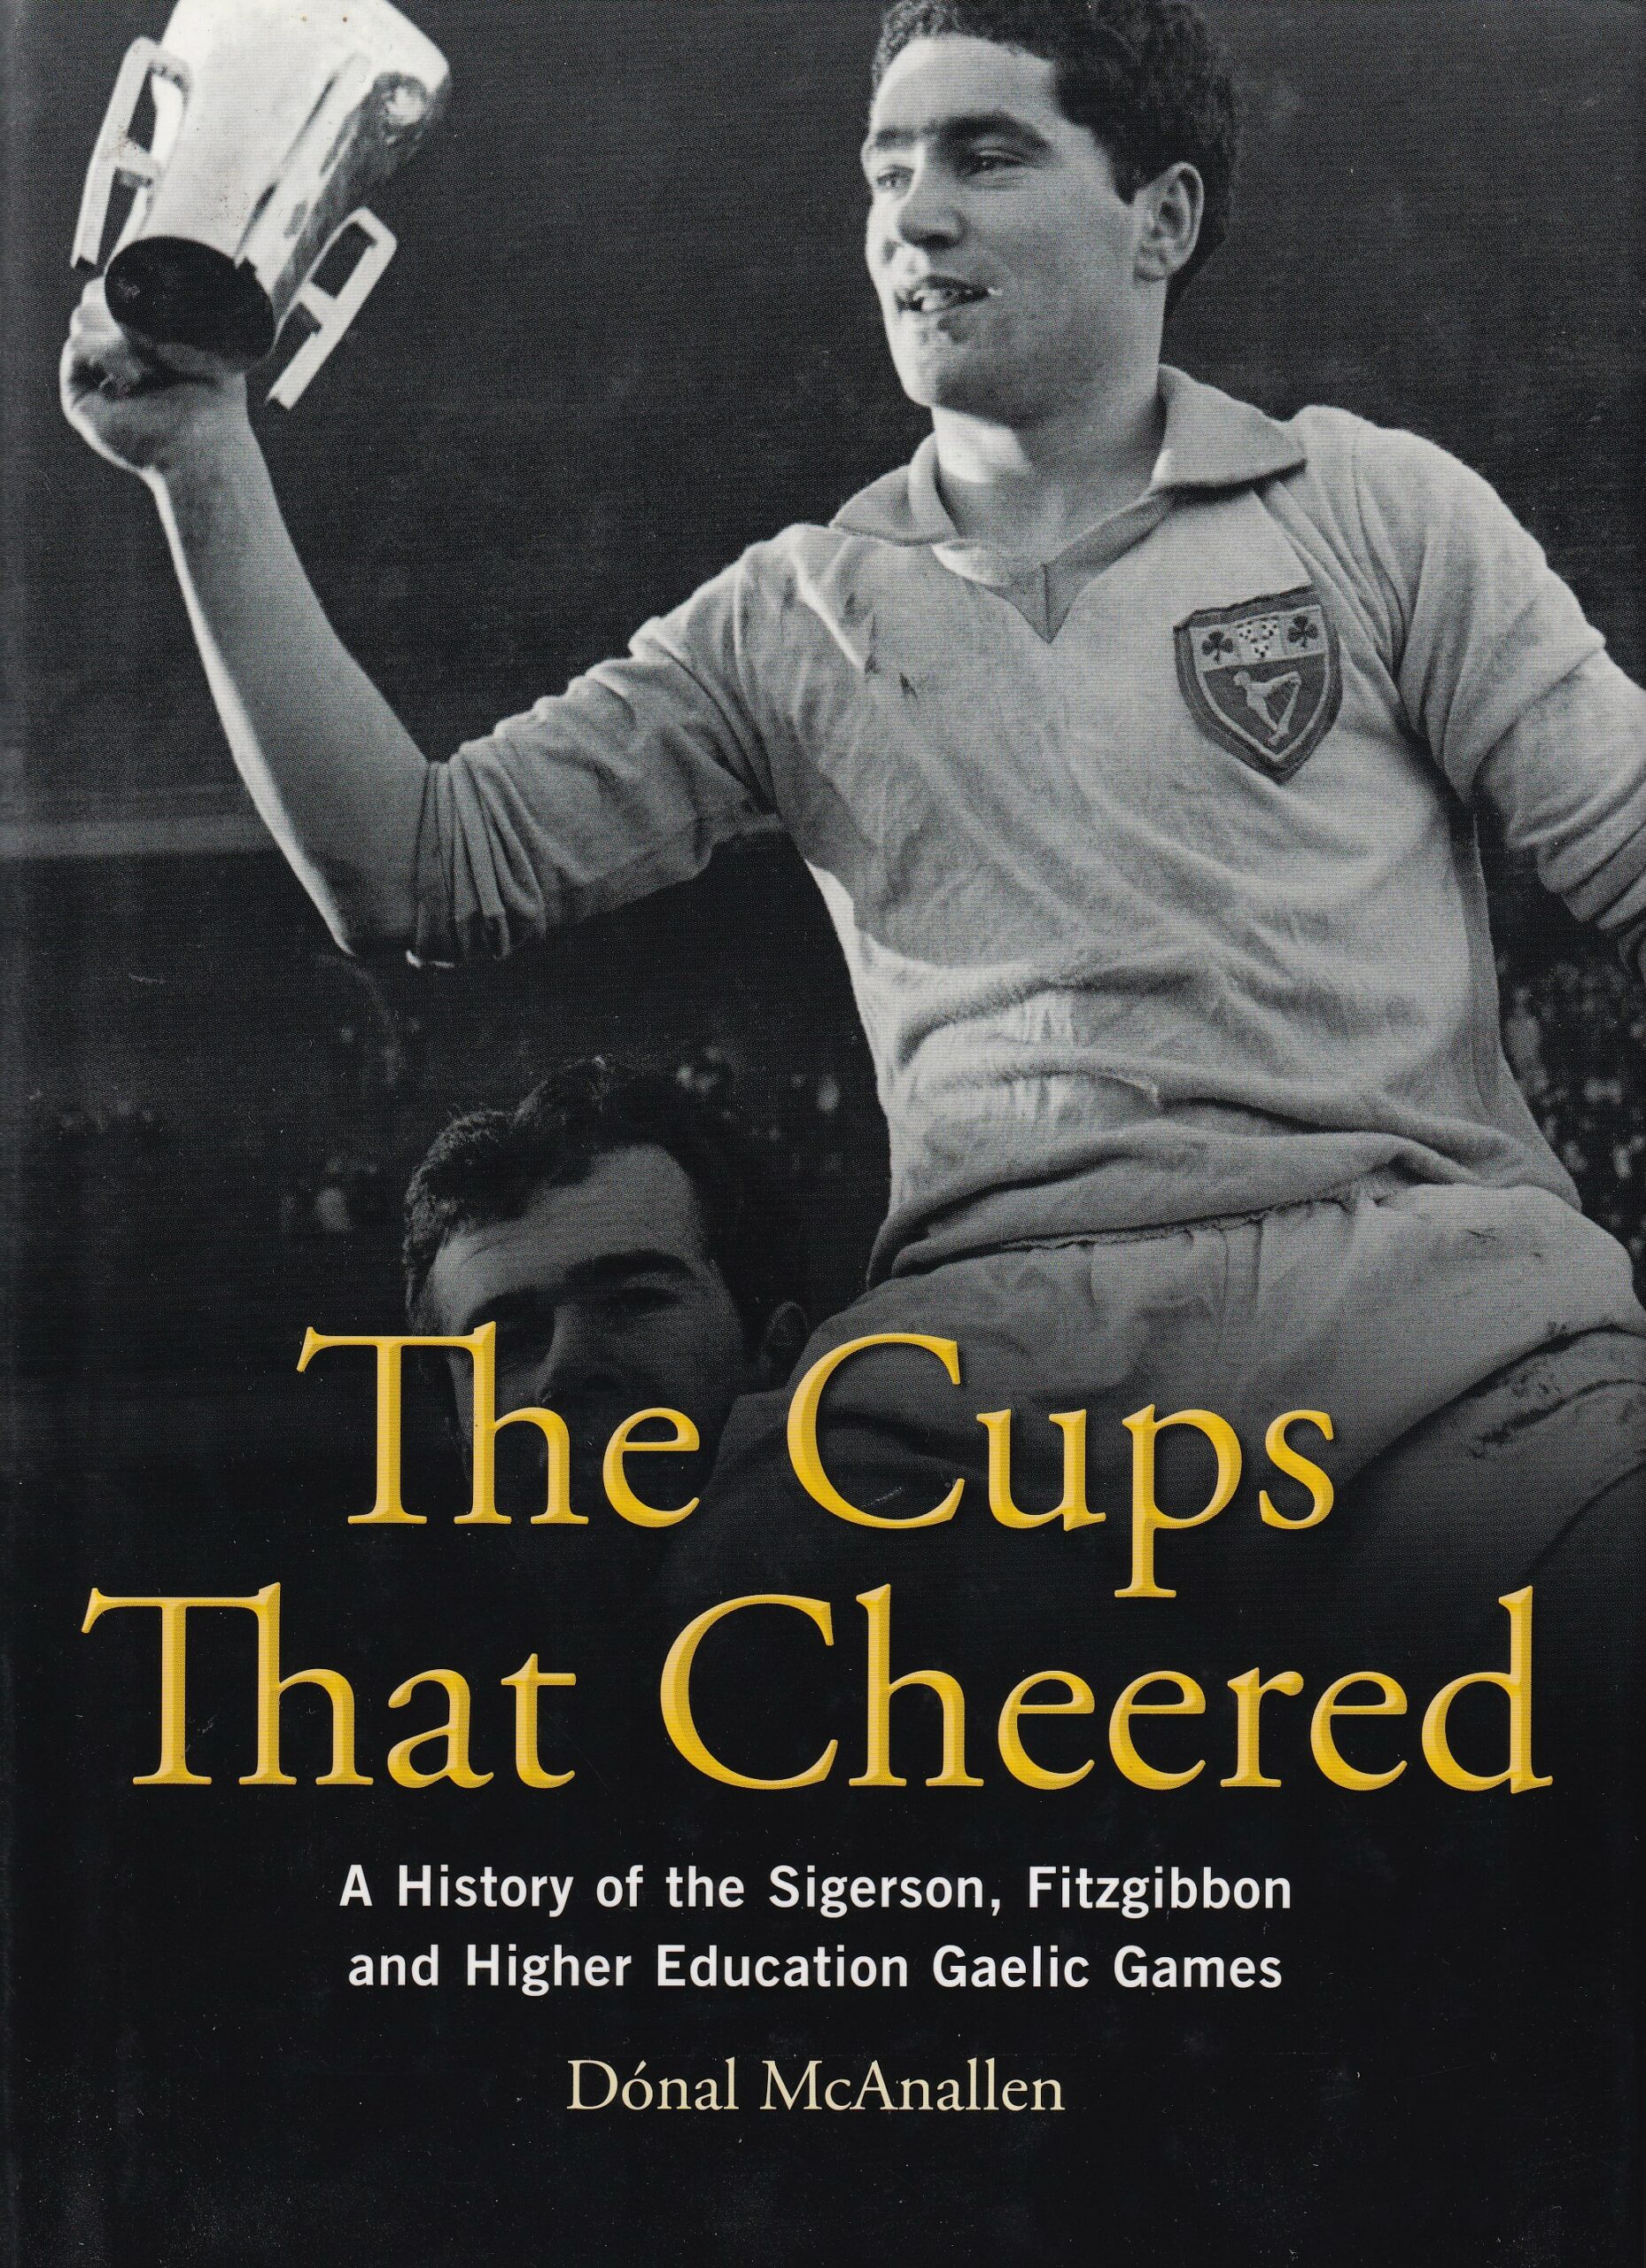 The Cups that Cheered: A History of the Sigerson, Fitzgibbon and Higher Education Gaelic Games by Dónal McAnallen